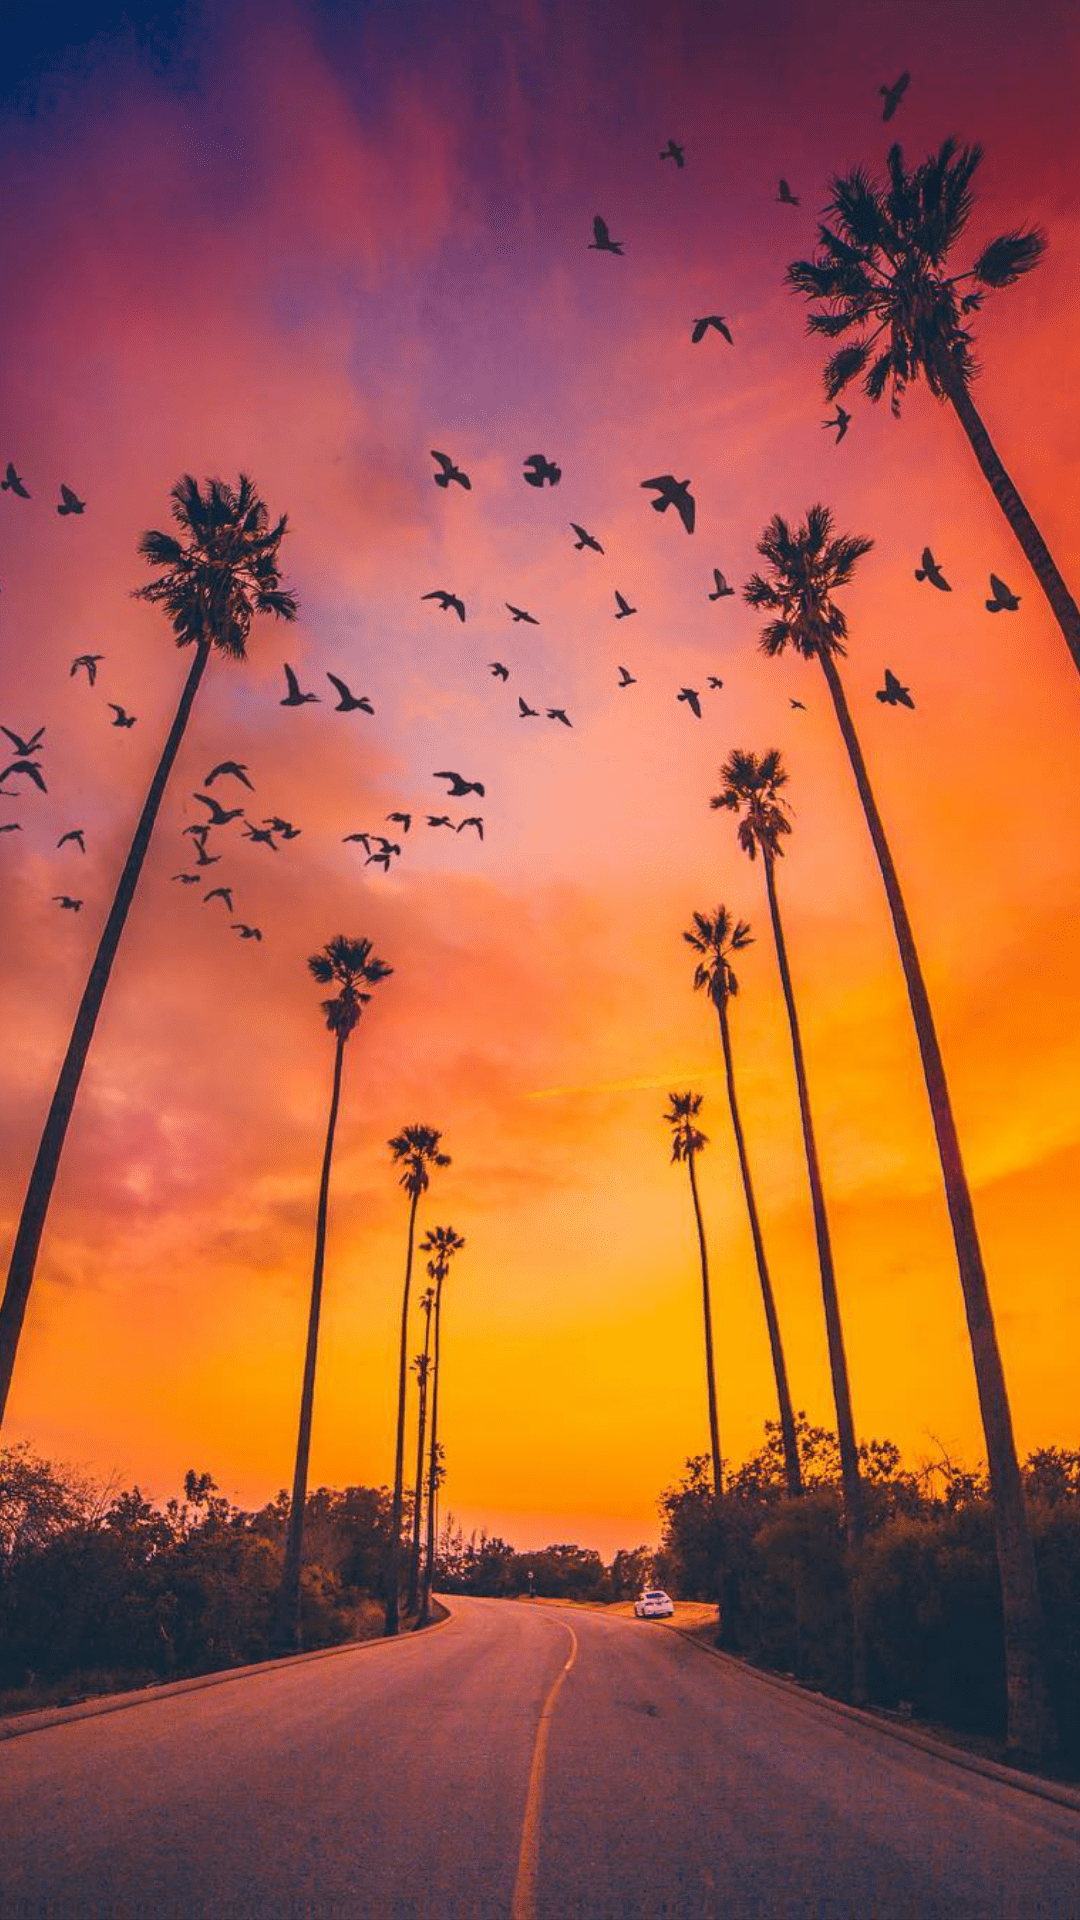 A flock of birds flying over a palm tree lined road during a sunset - Sunset